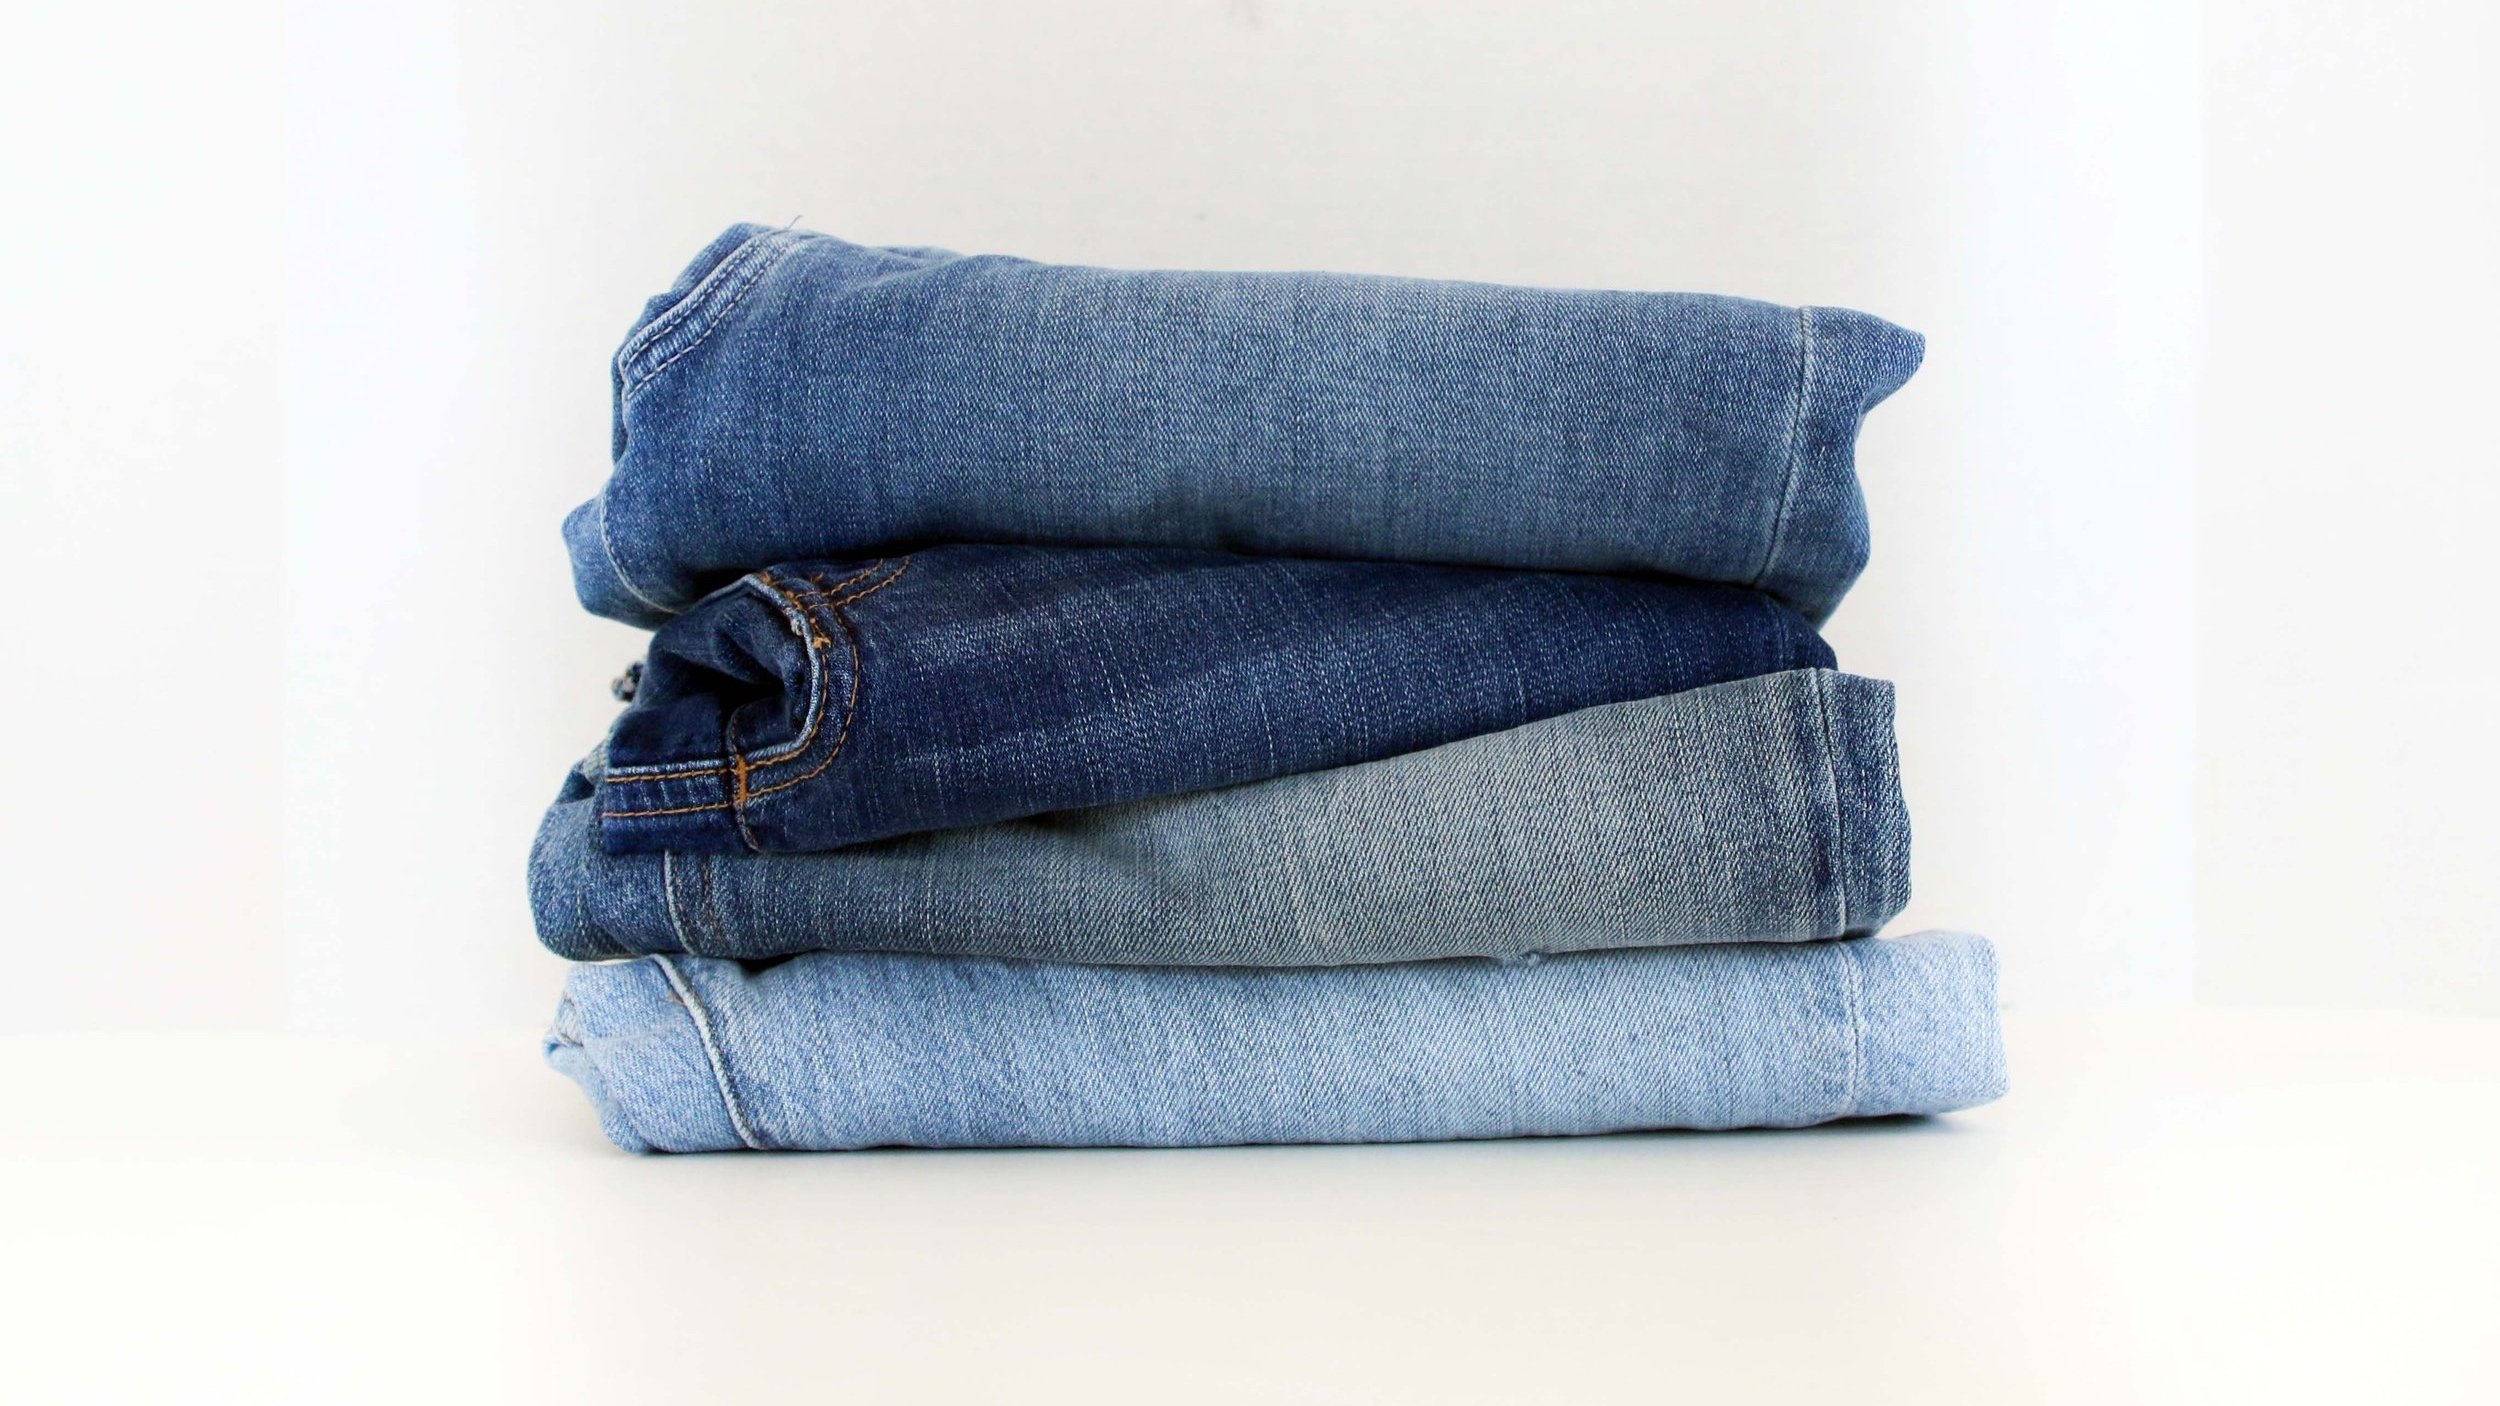 How to Get Grass Stains out of Jeans | Personal Styling | Stitch Fix